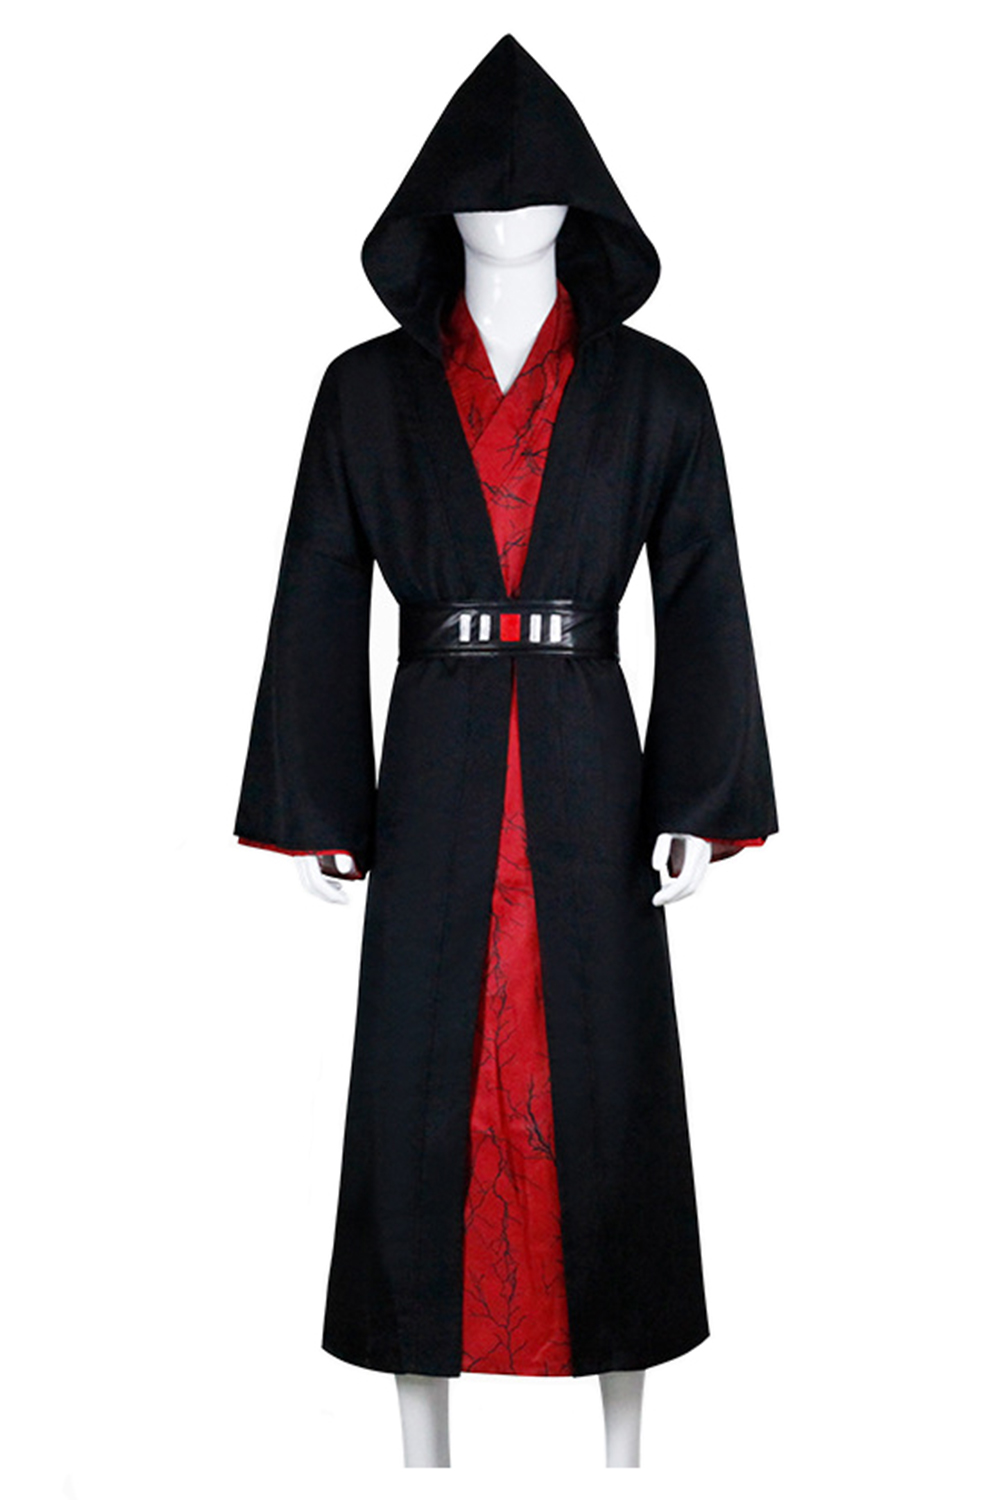 Movie Sheev Palpatine Outfits Halloween Carnival Suit Cosplay Costume